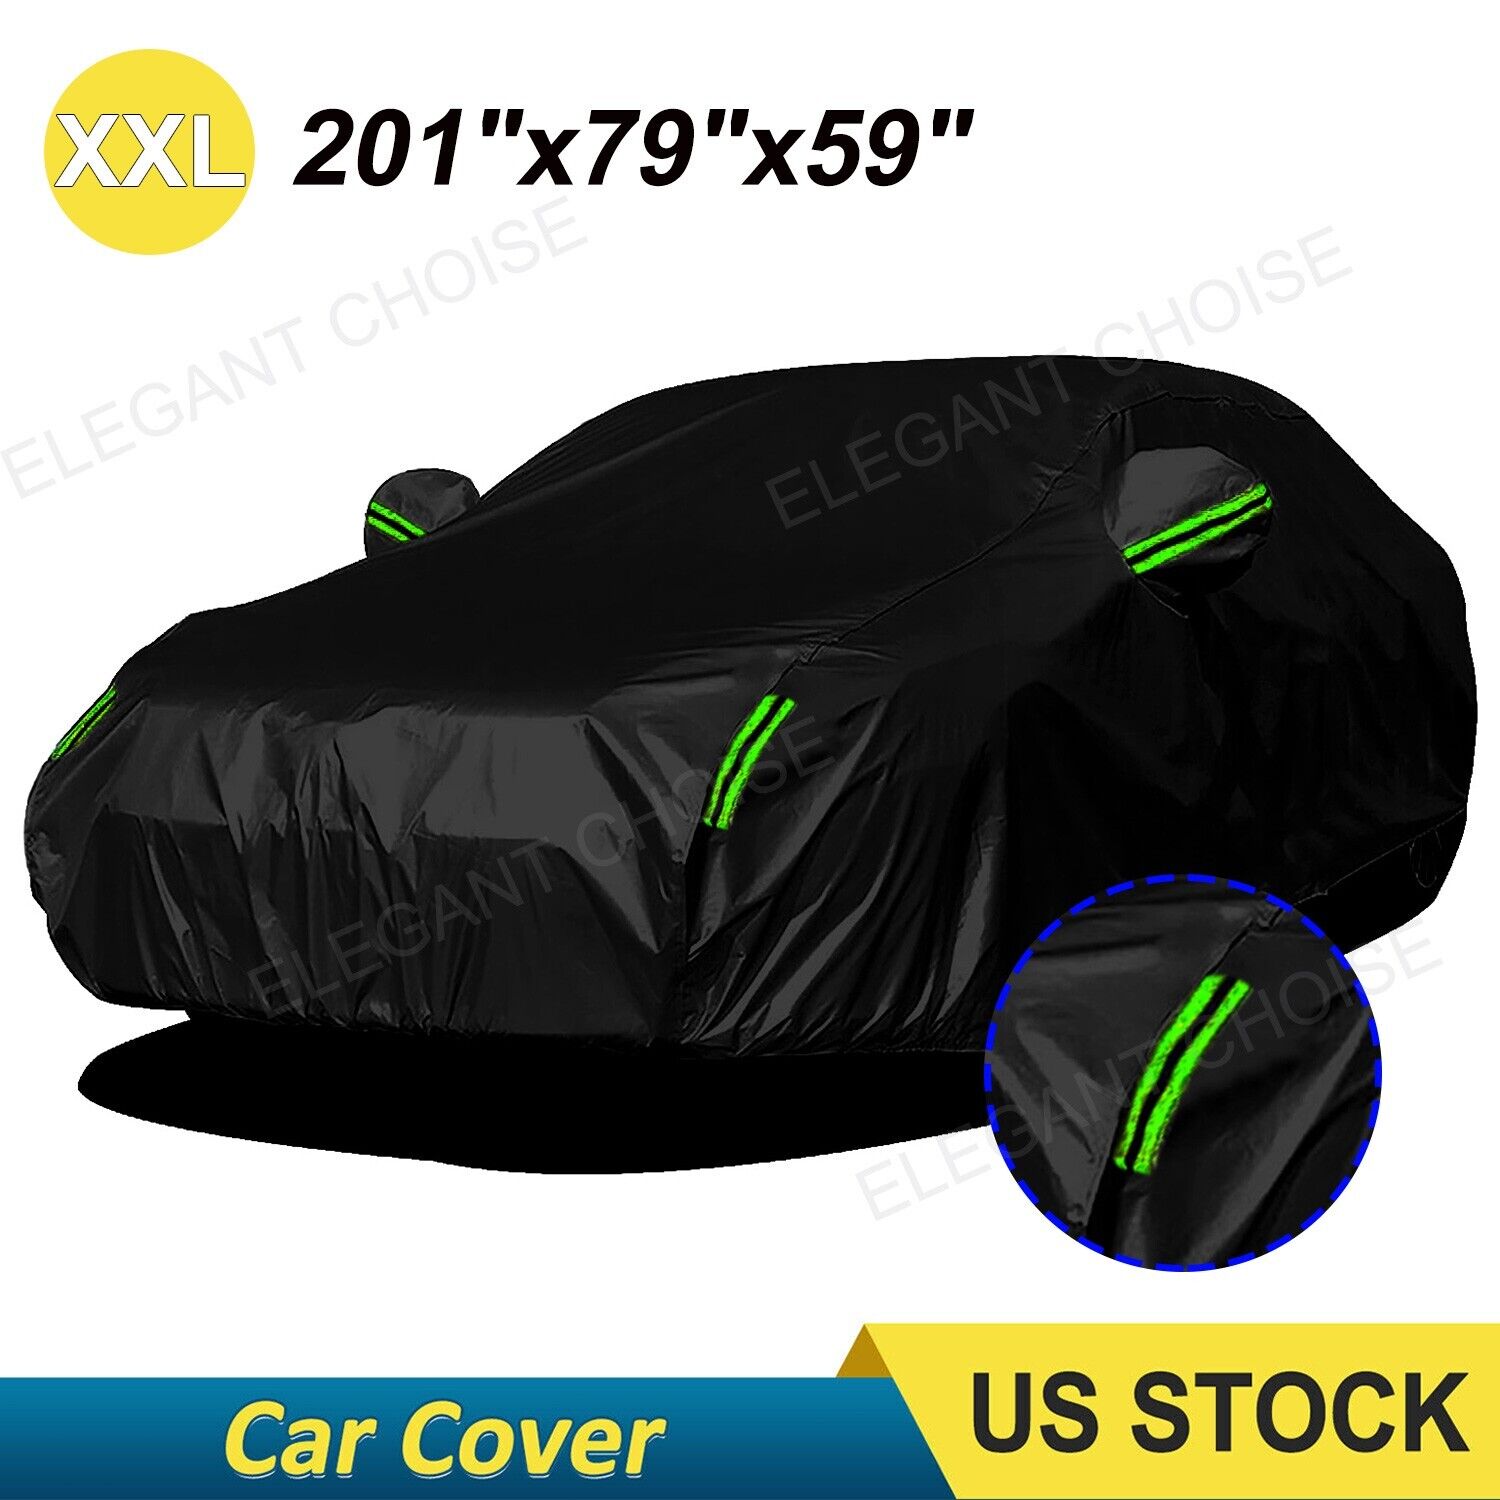 XXL Car Cover Waterproof All Weather for car, Full car Cover Rain Sun Protection